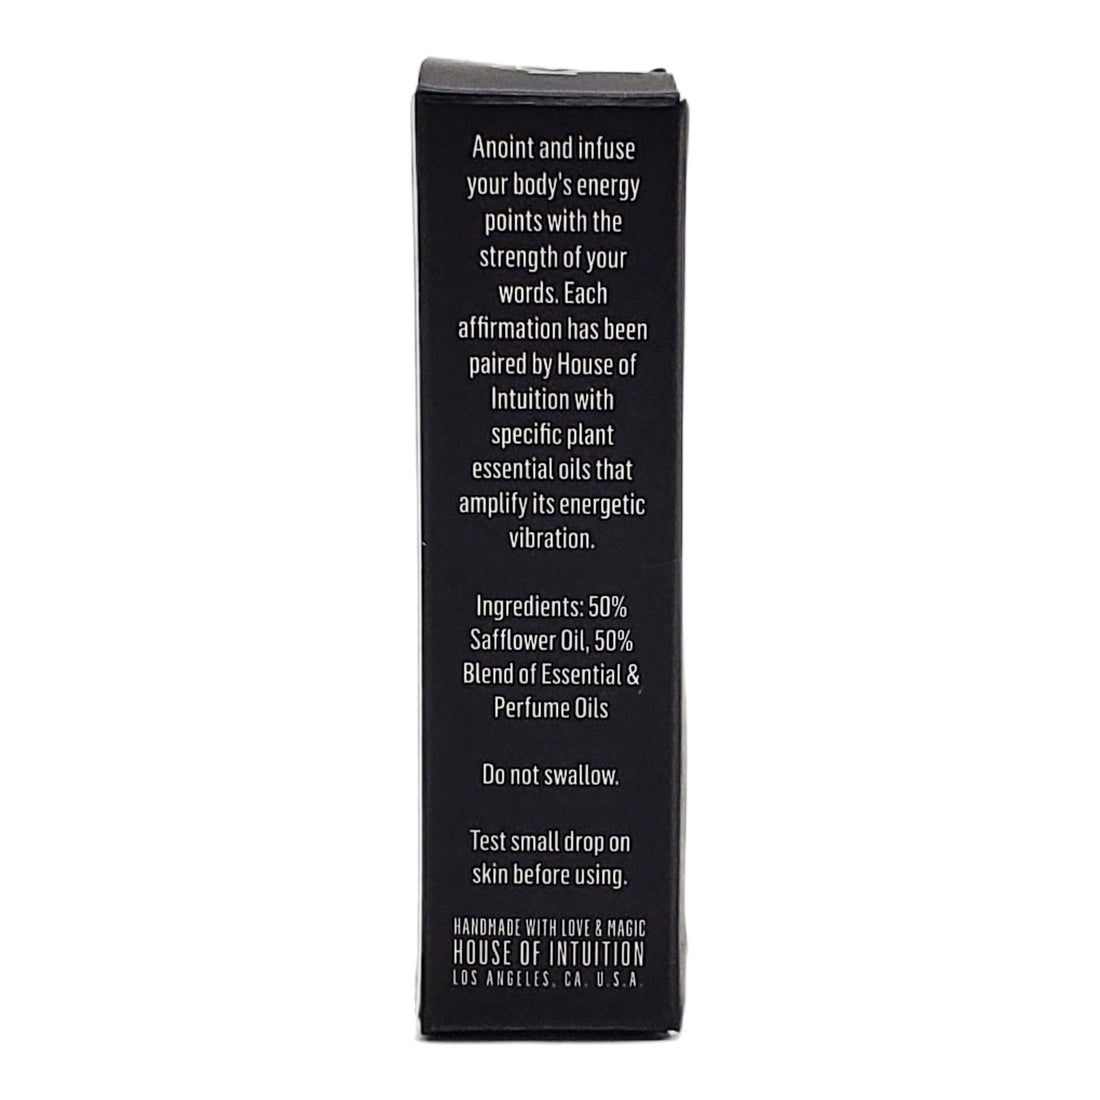 "I am Purifying" Affirmation Rollerball Affirmation Roll On House of Intuition 